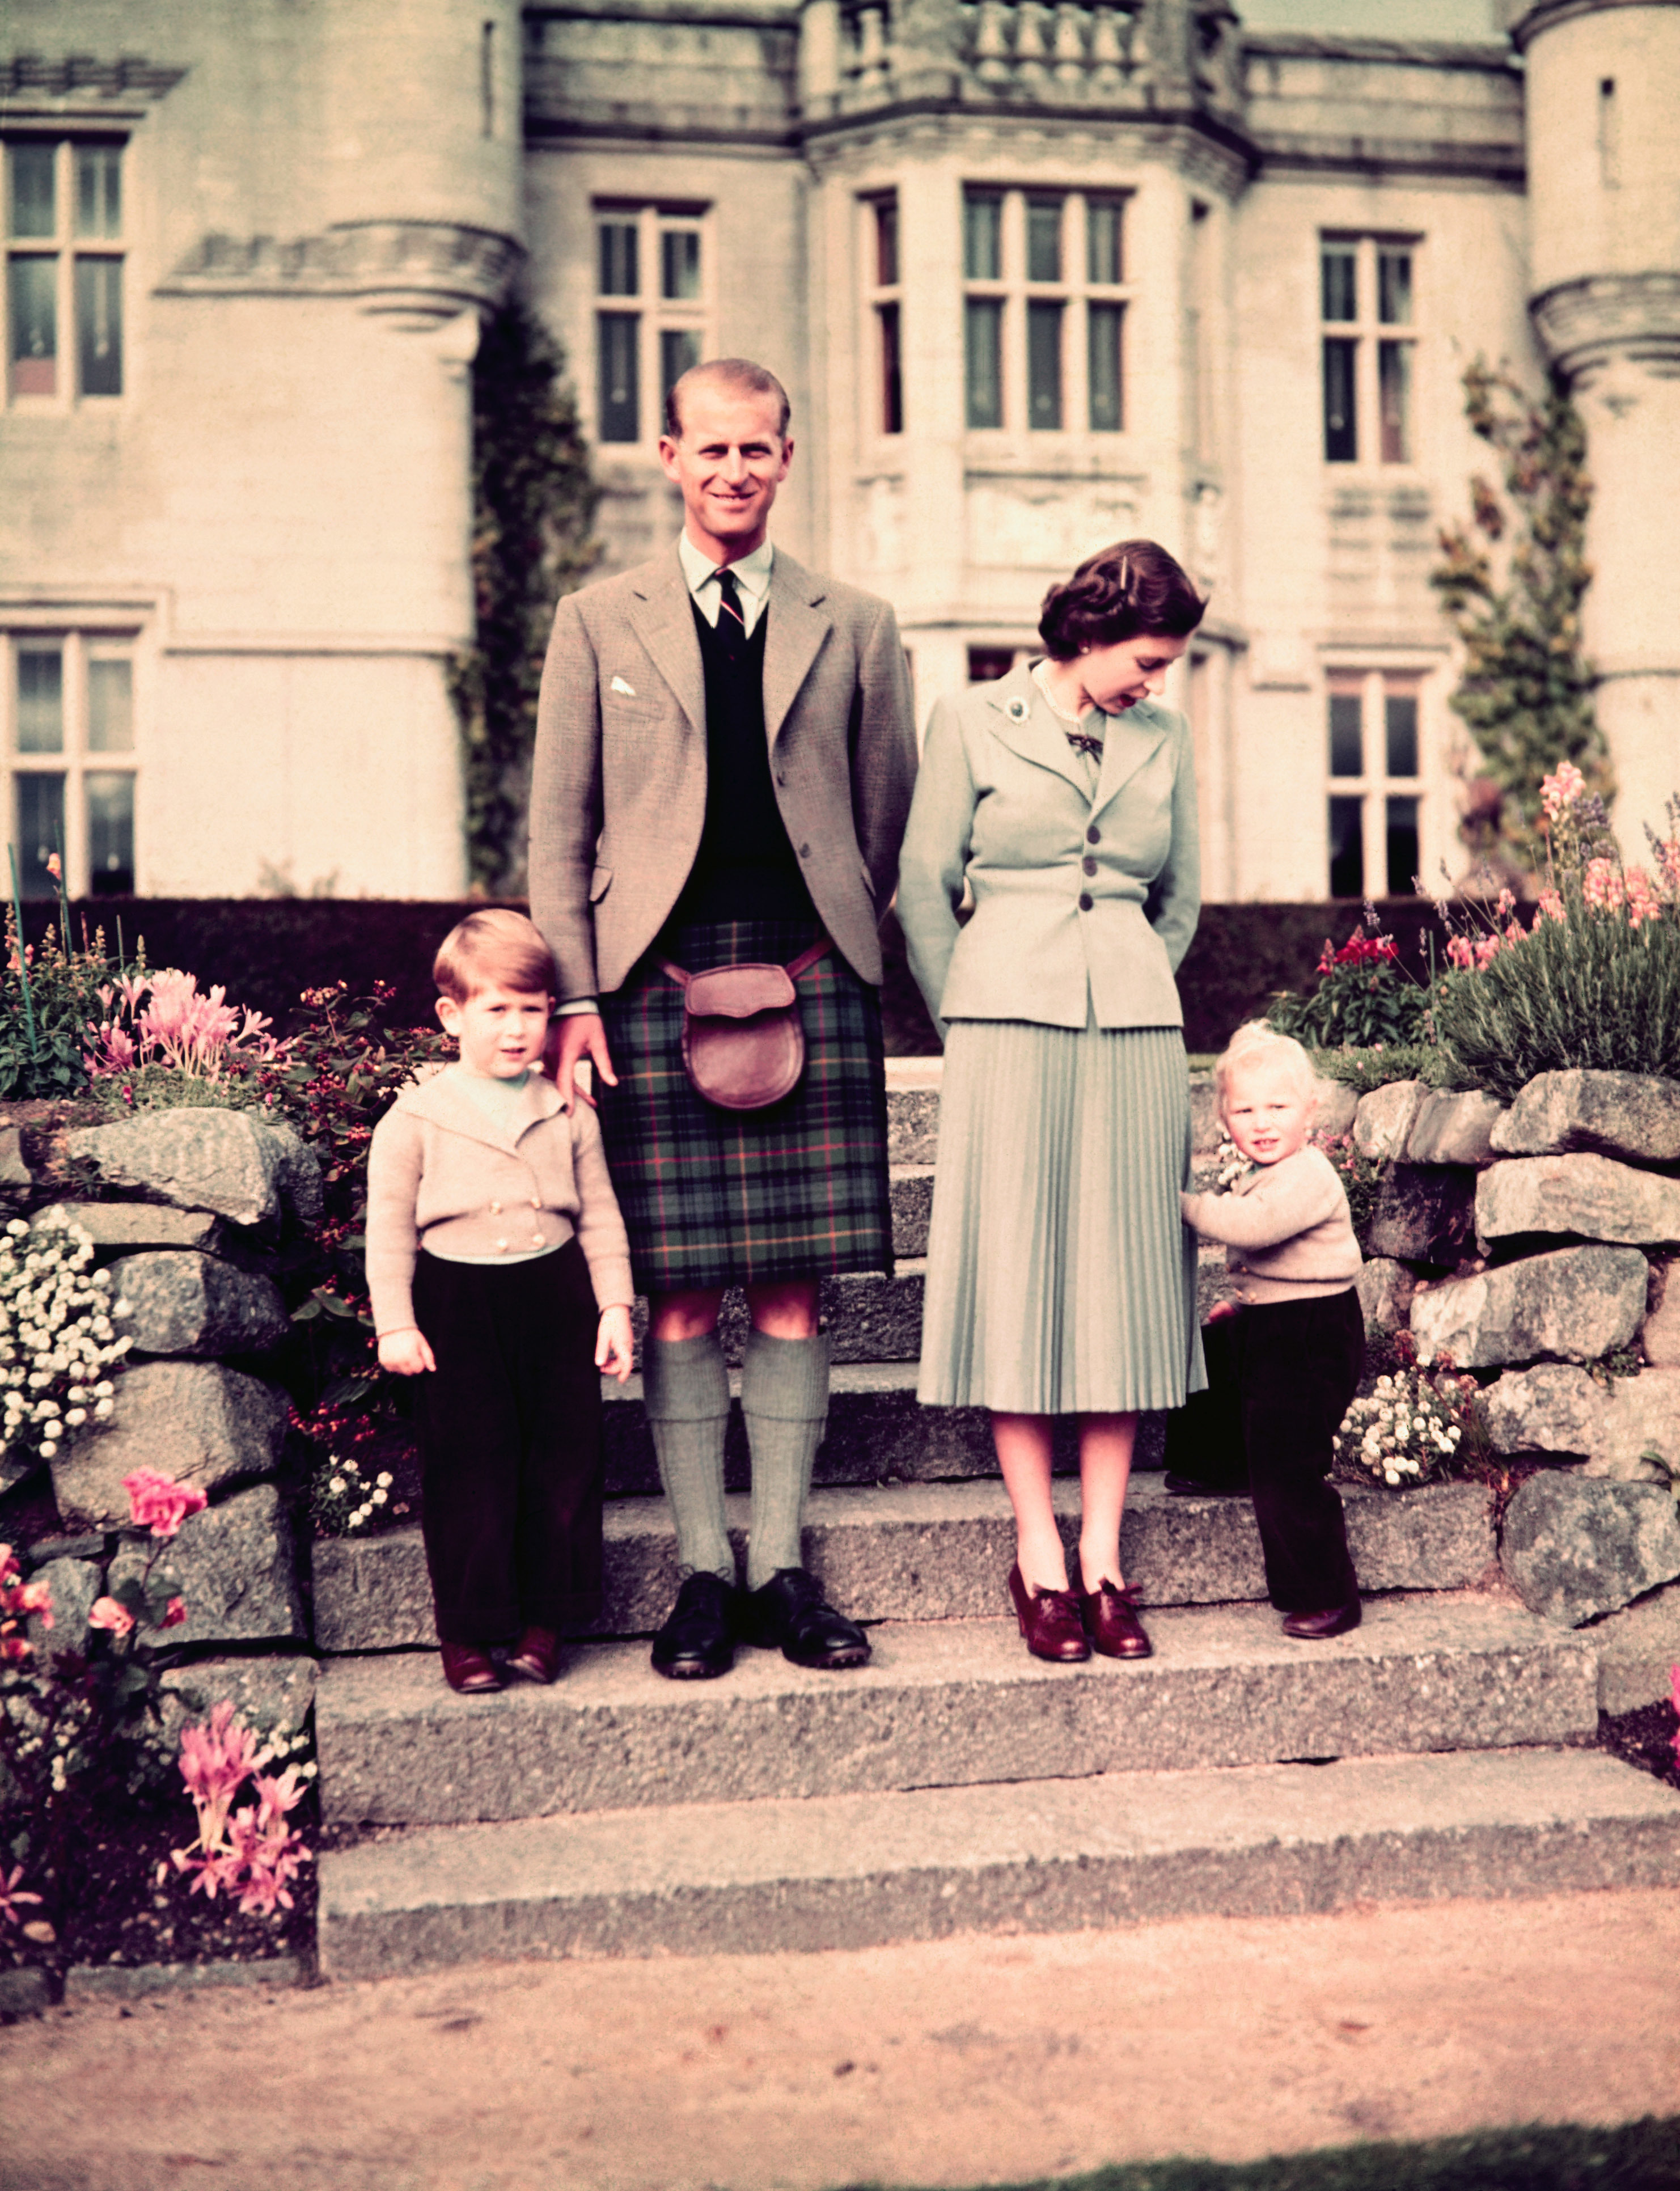 <p>A newly crowned Queen Elizabeth II wore a pleated skirt and three-button jacket while Prince Philip, the Duke of Edinburgh, wore a kilt and Prince Charles and Princess Anne donned corduroys and short woolen jackets outside Balmoral Castle in 1953.</p>